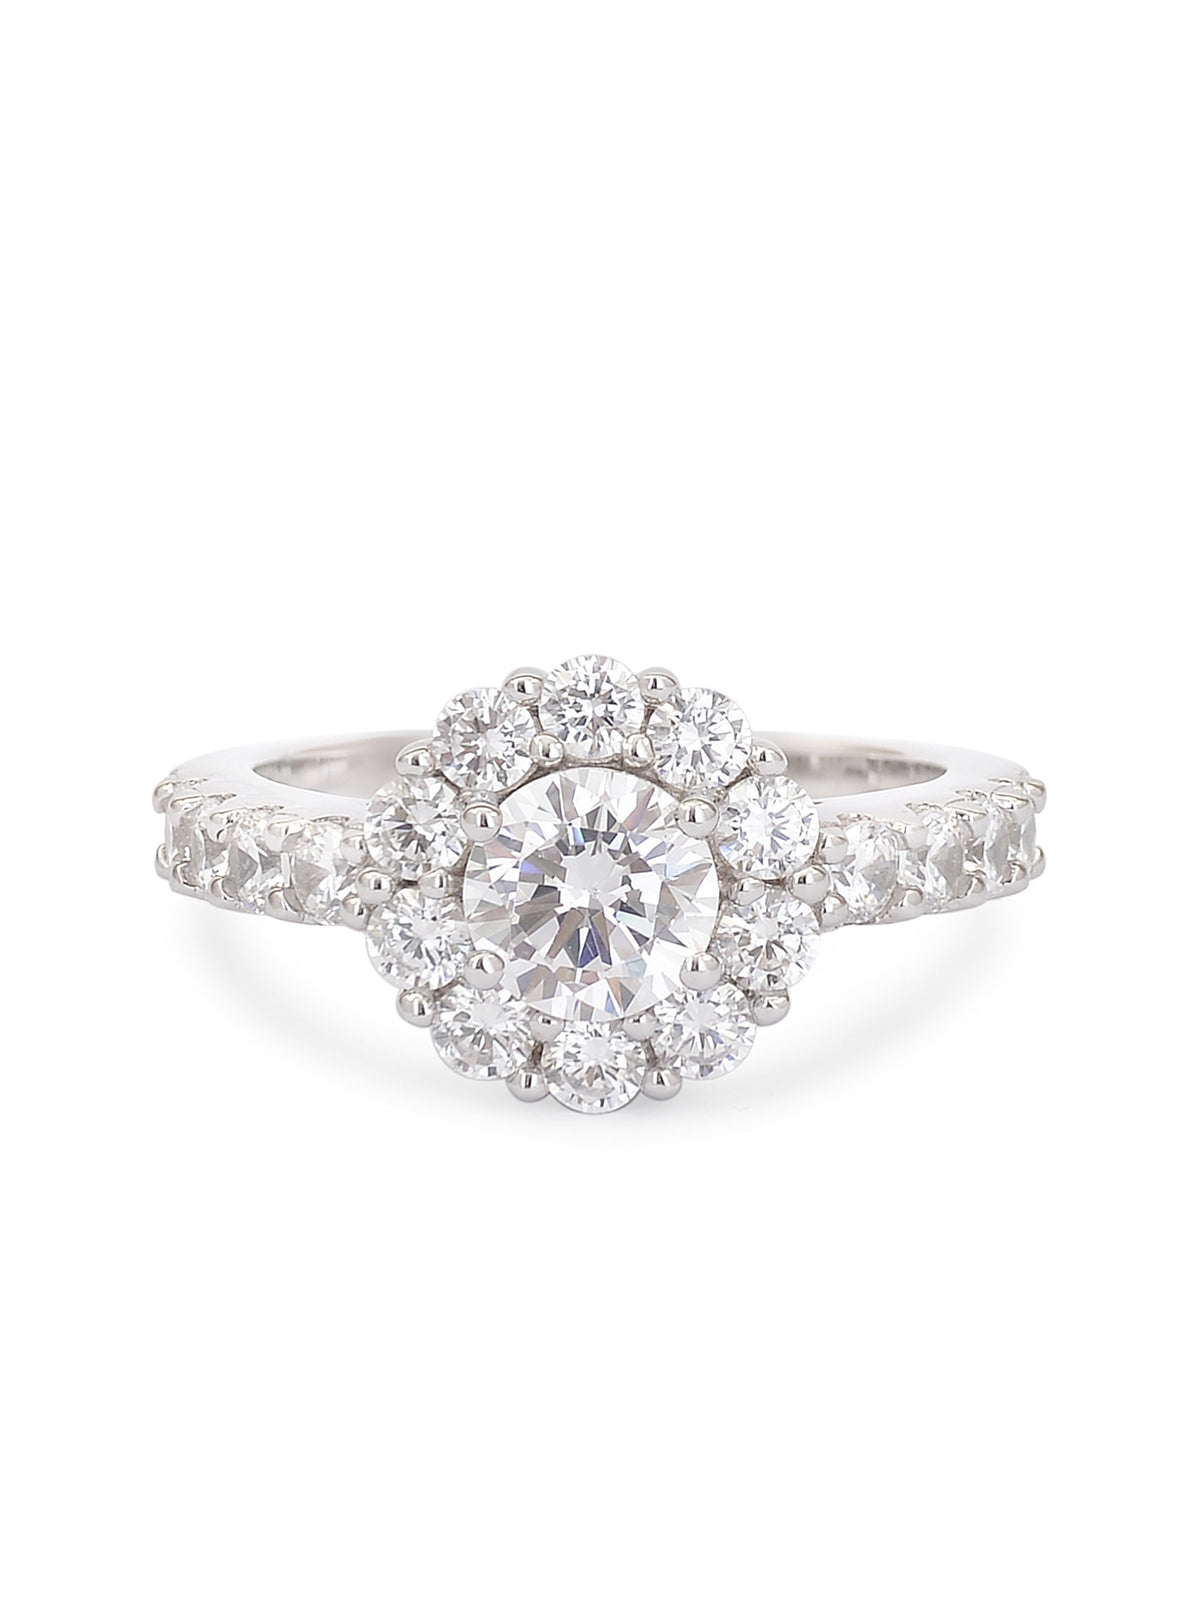 THE PERFECT 0.75 CARAT SOLITAIRE RING